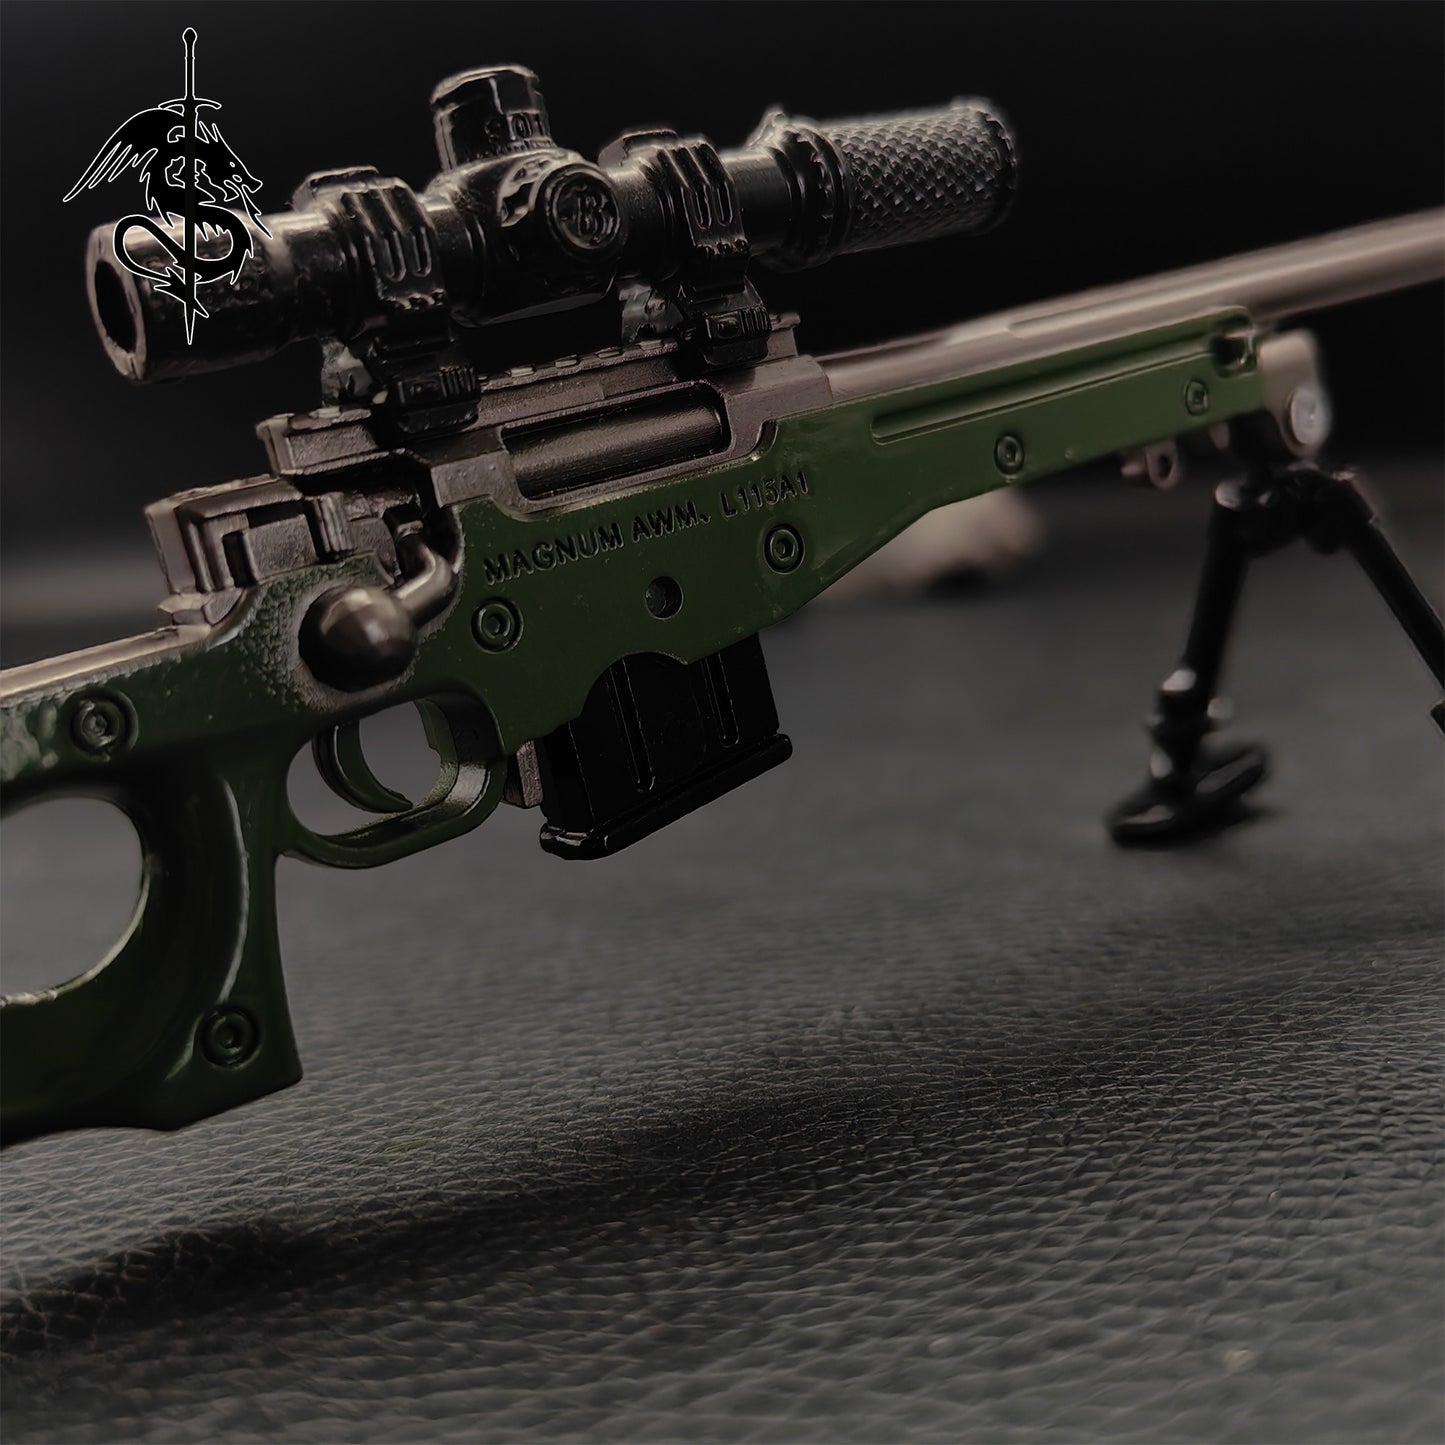 Metal AWM Automate Wealth Management Small AWP Sniper Rifle 